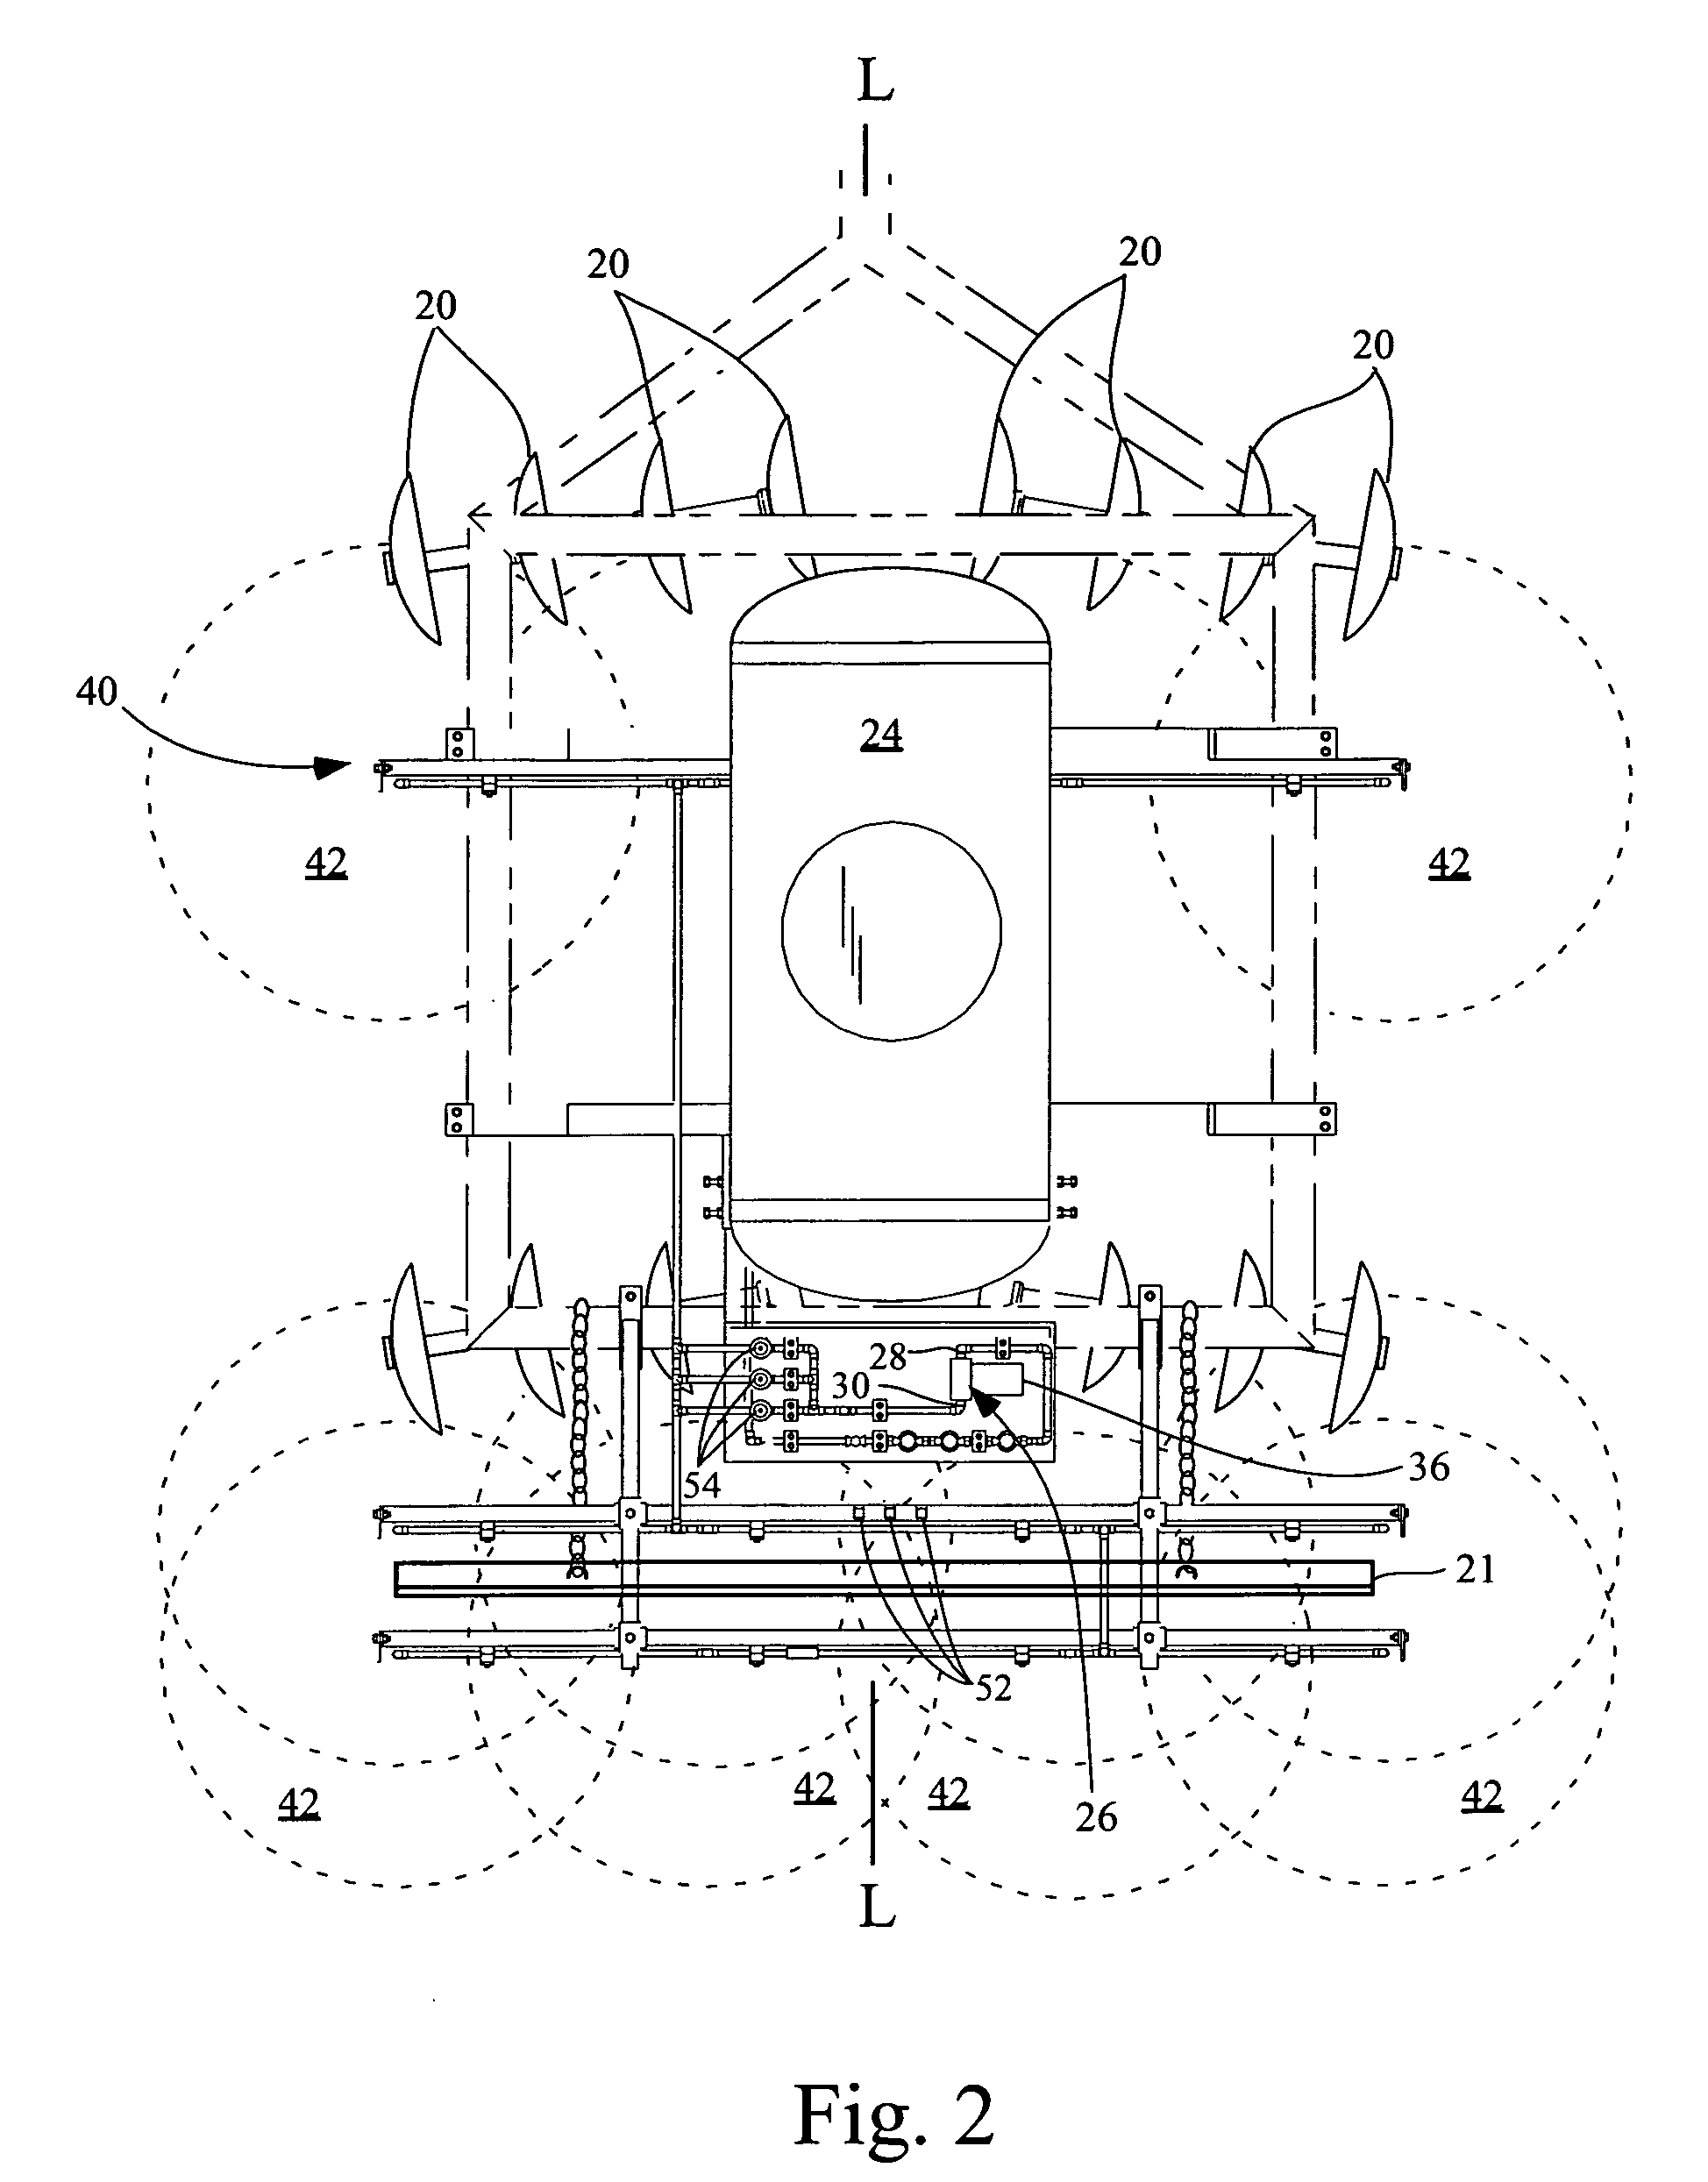 Apparatus for dust control